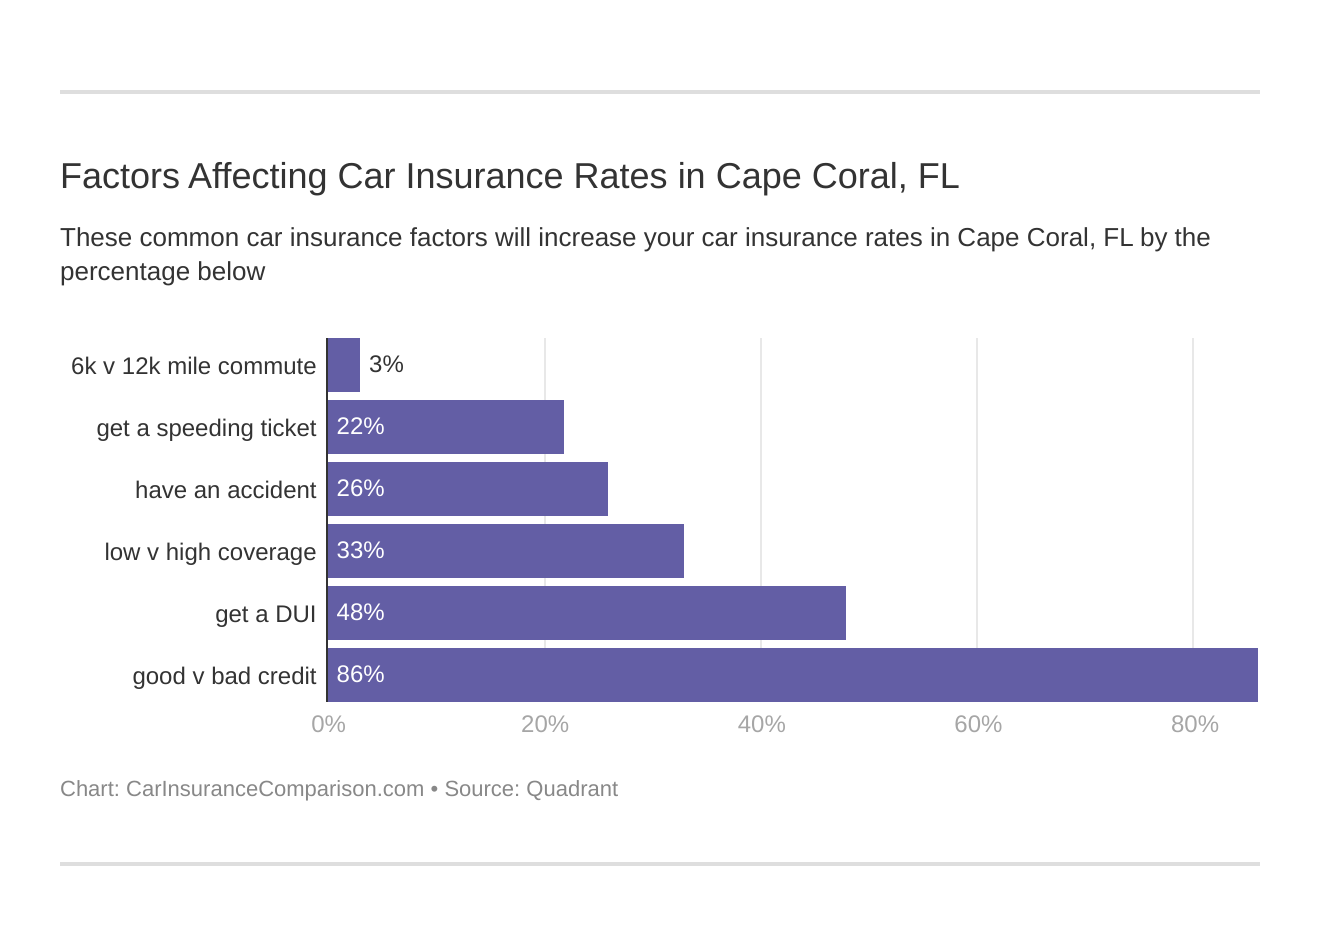 Factors Affecting Car Insurance Rates in Cape Coral, FL